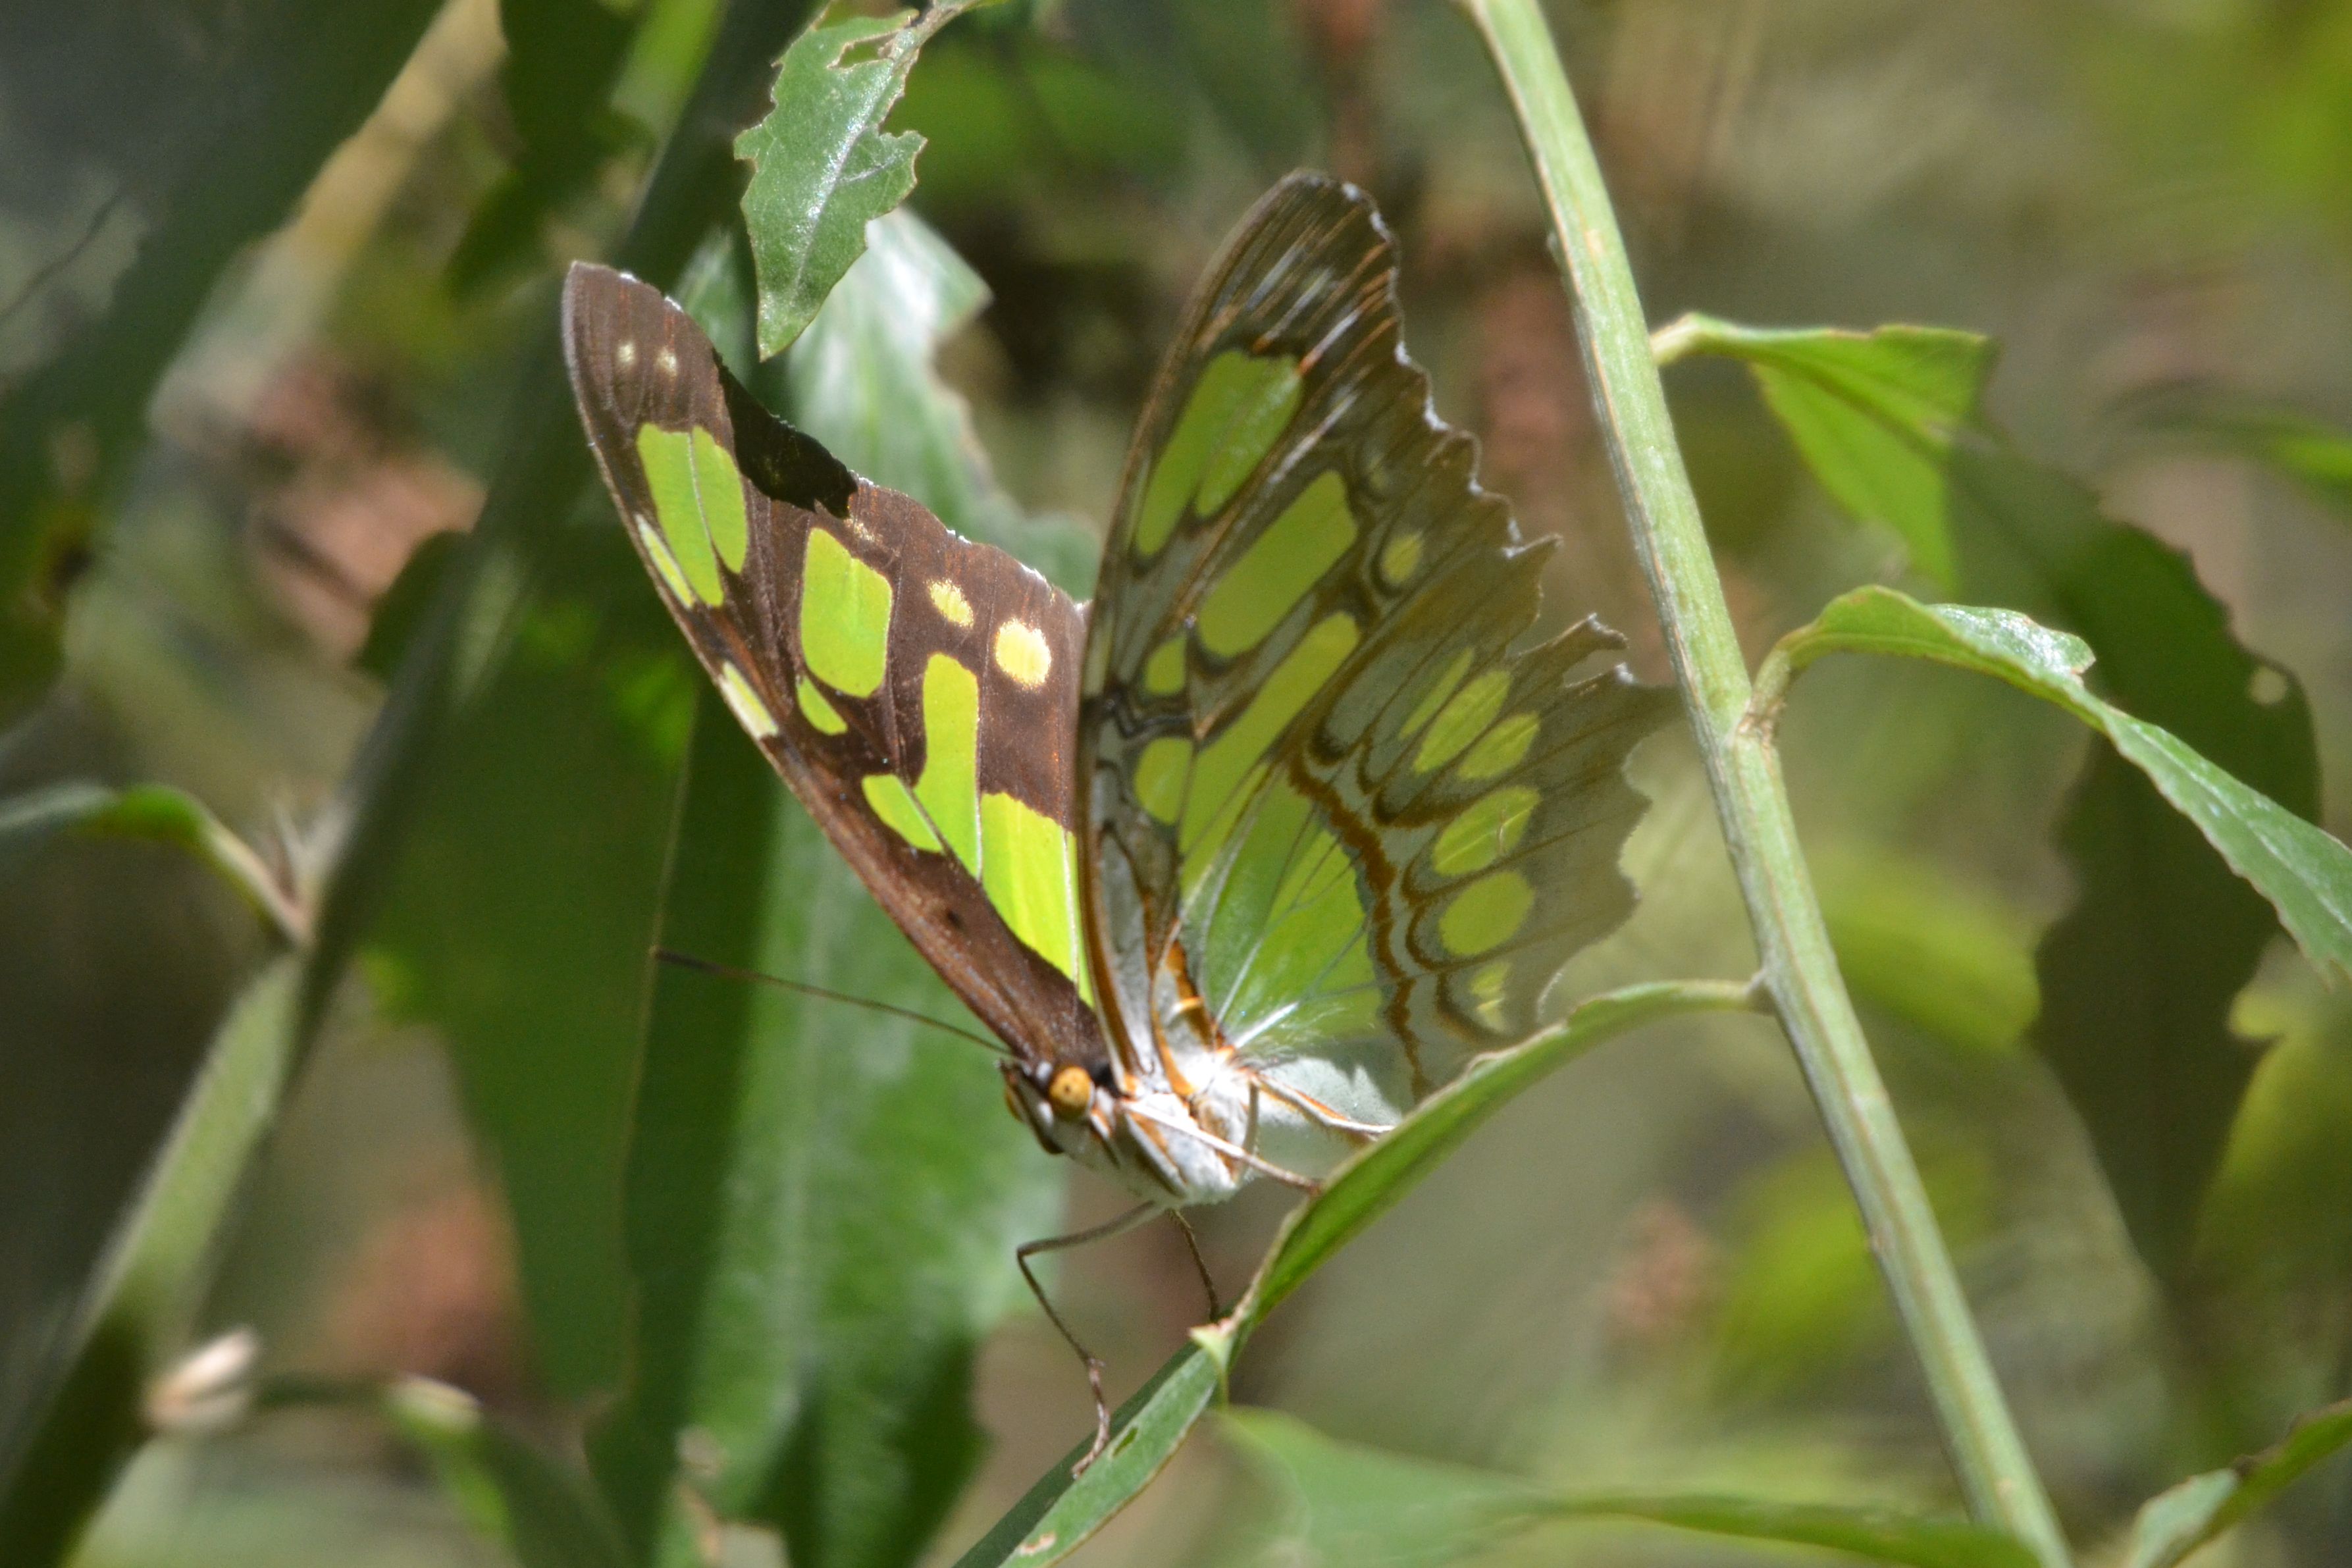 Click picture to see more Butterflys.